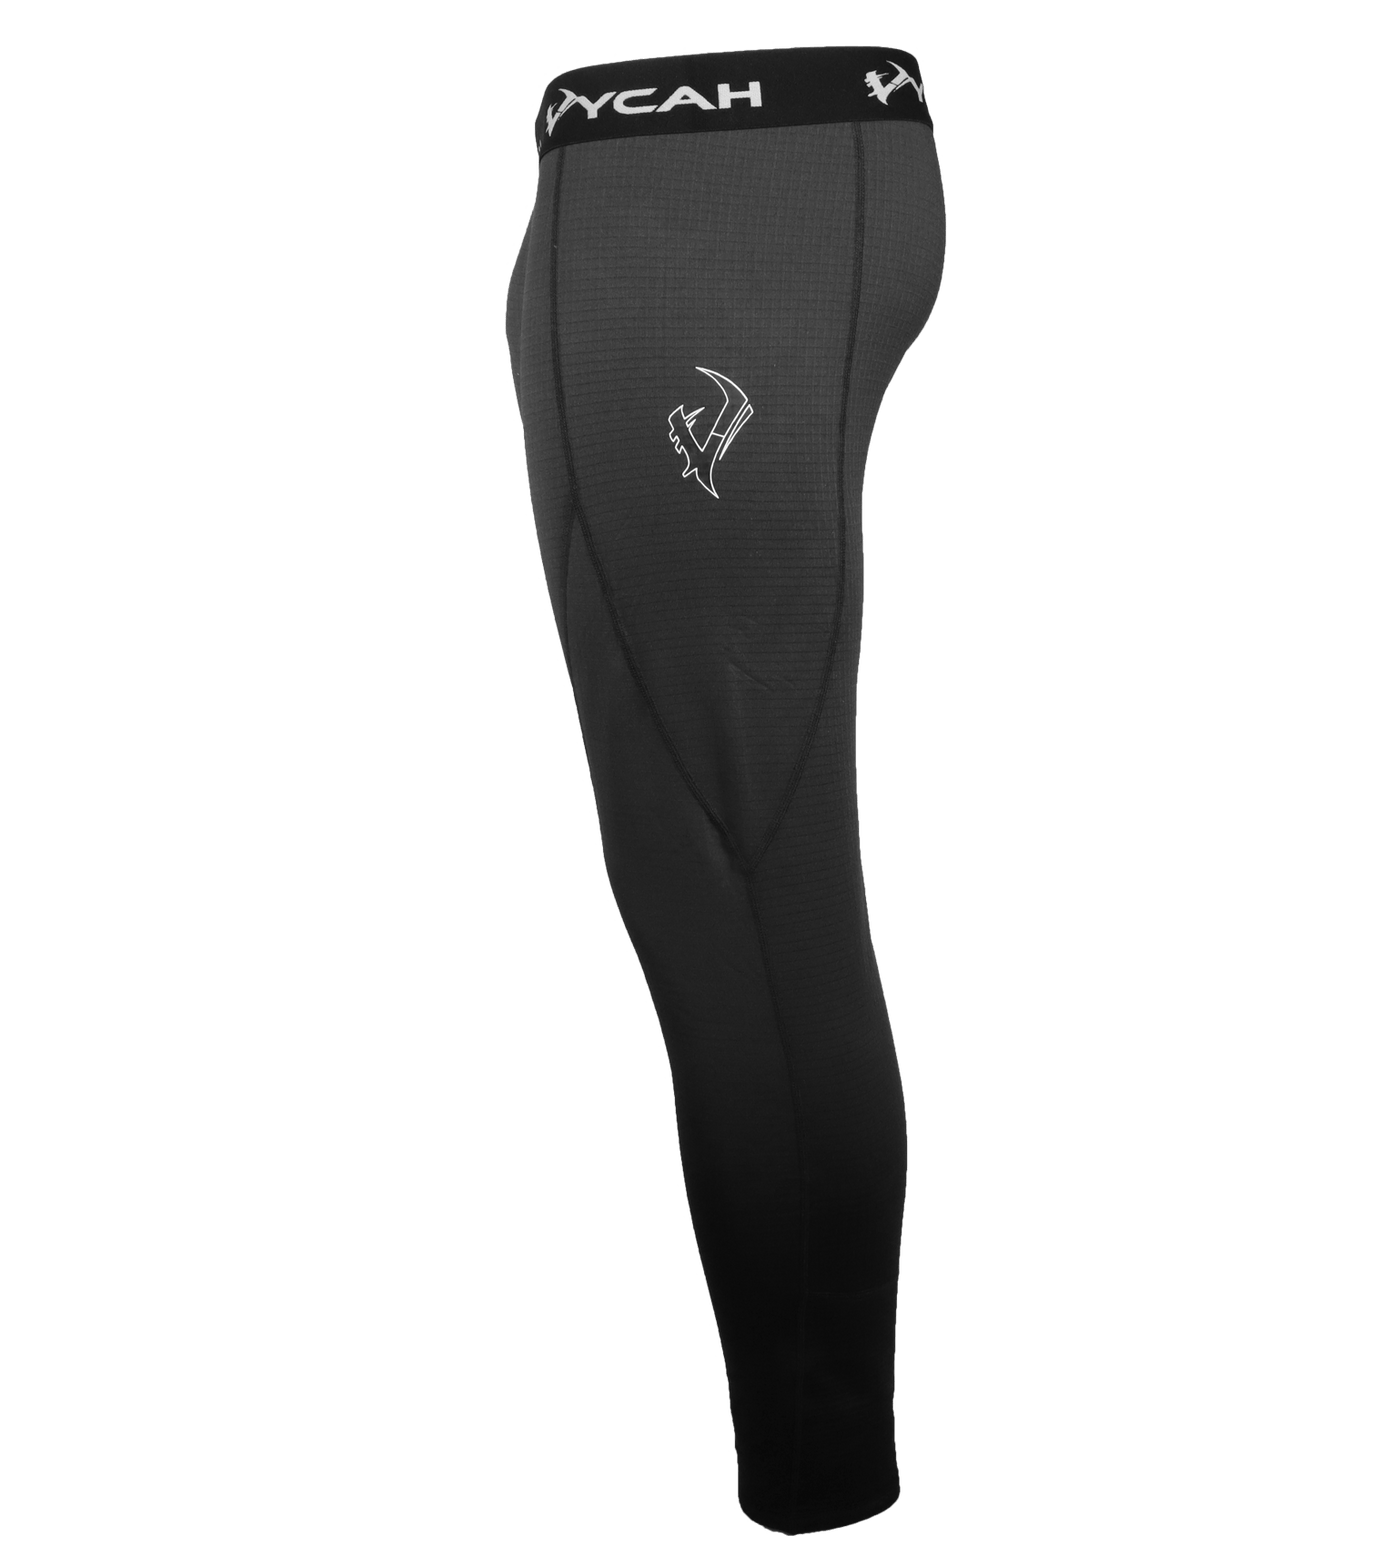 Pyrex Extreme Pant - Charcoal - Vycah